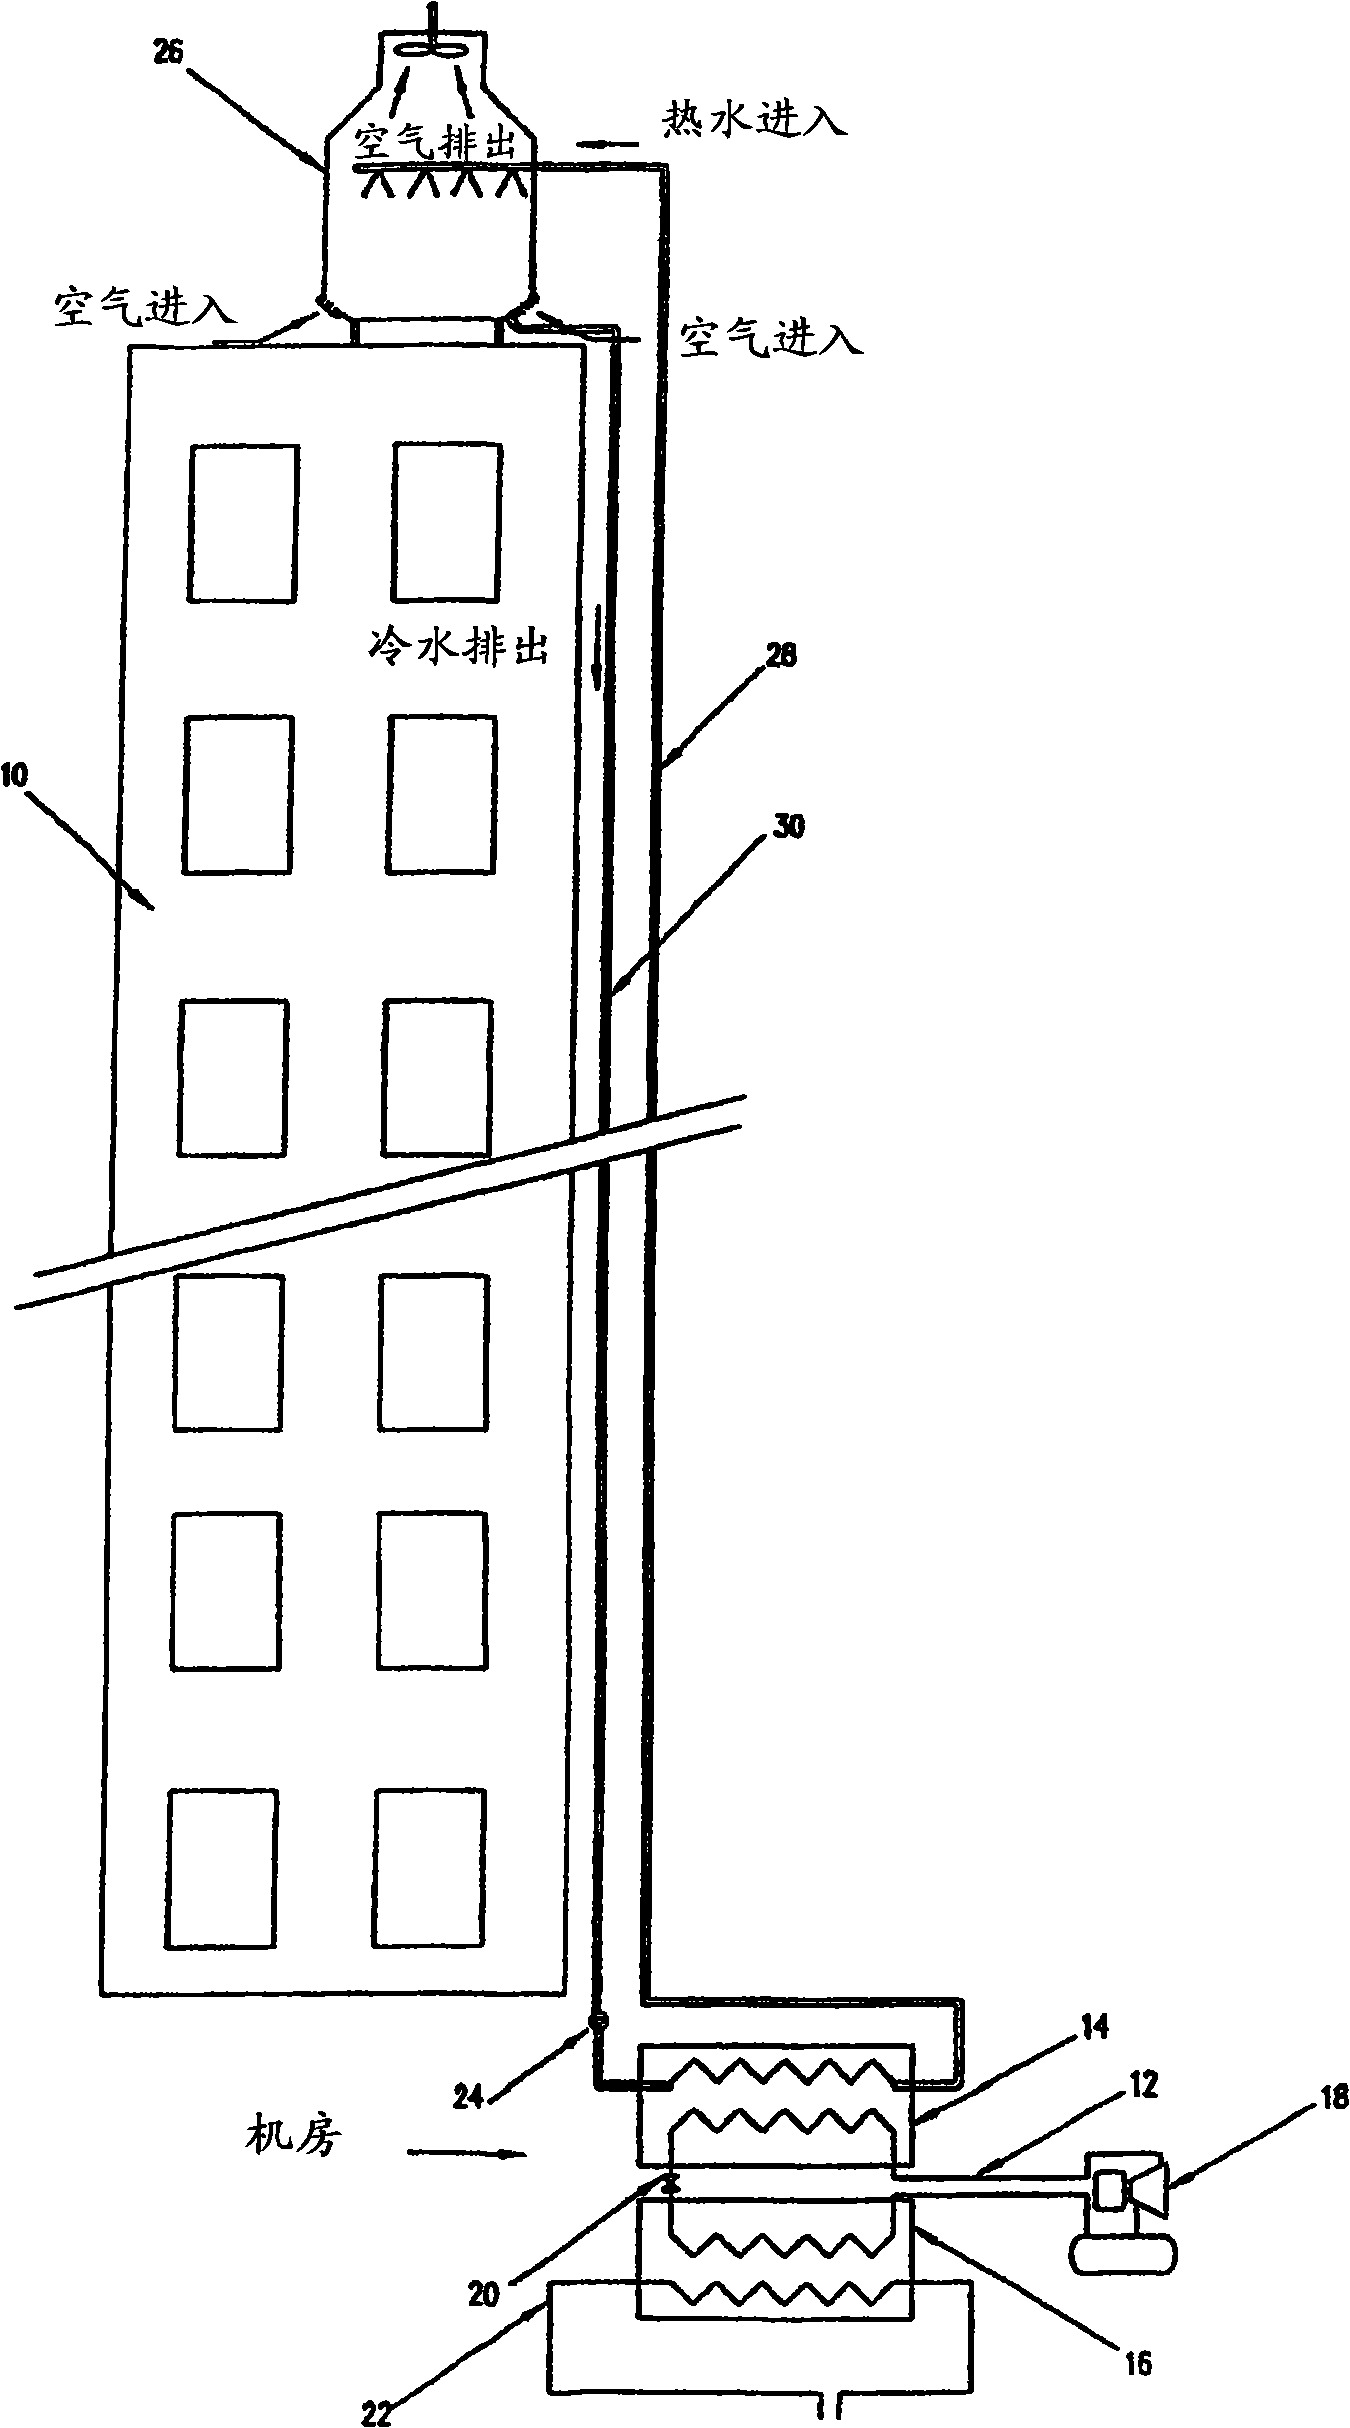 System and method of cooling